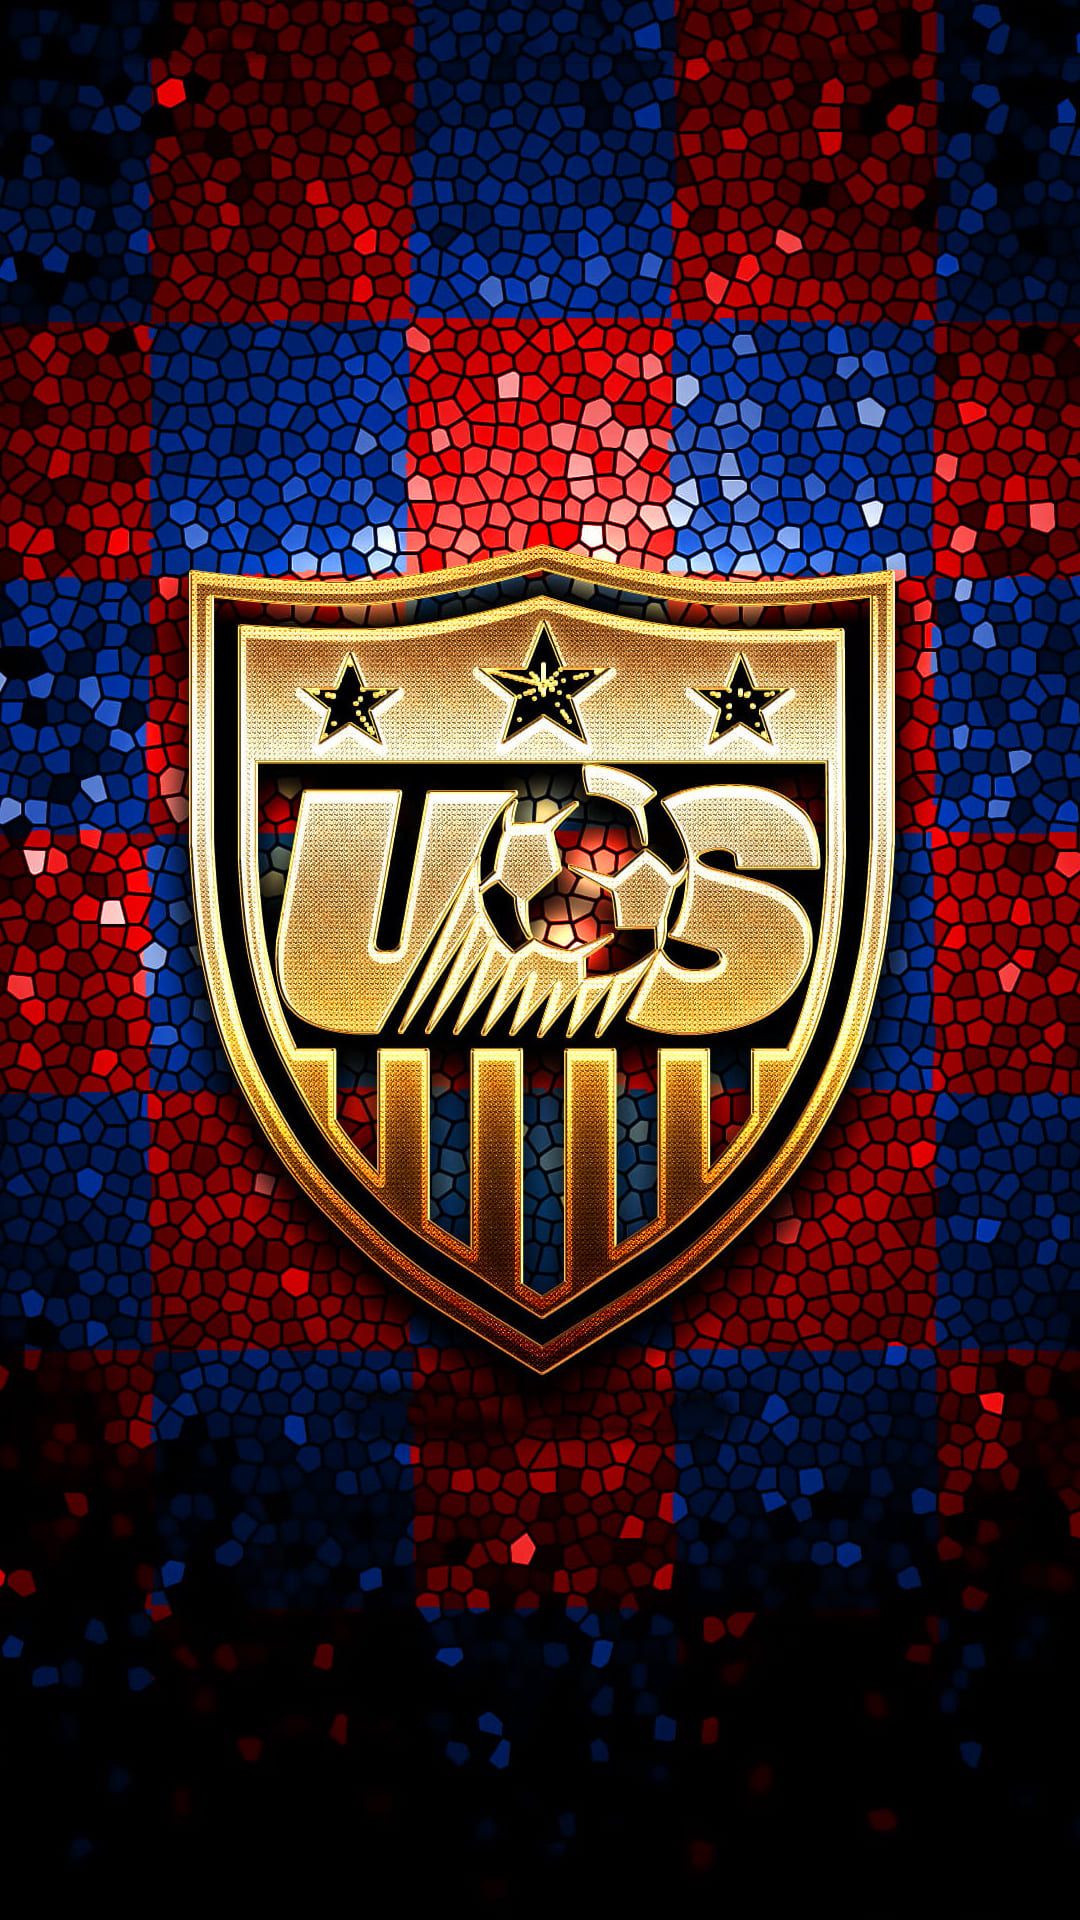 The us soccer team logo is on a red, blue and gold background - Soccer